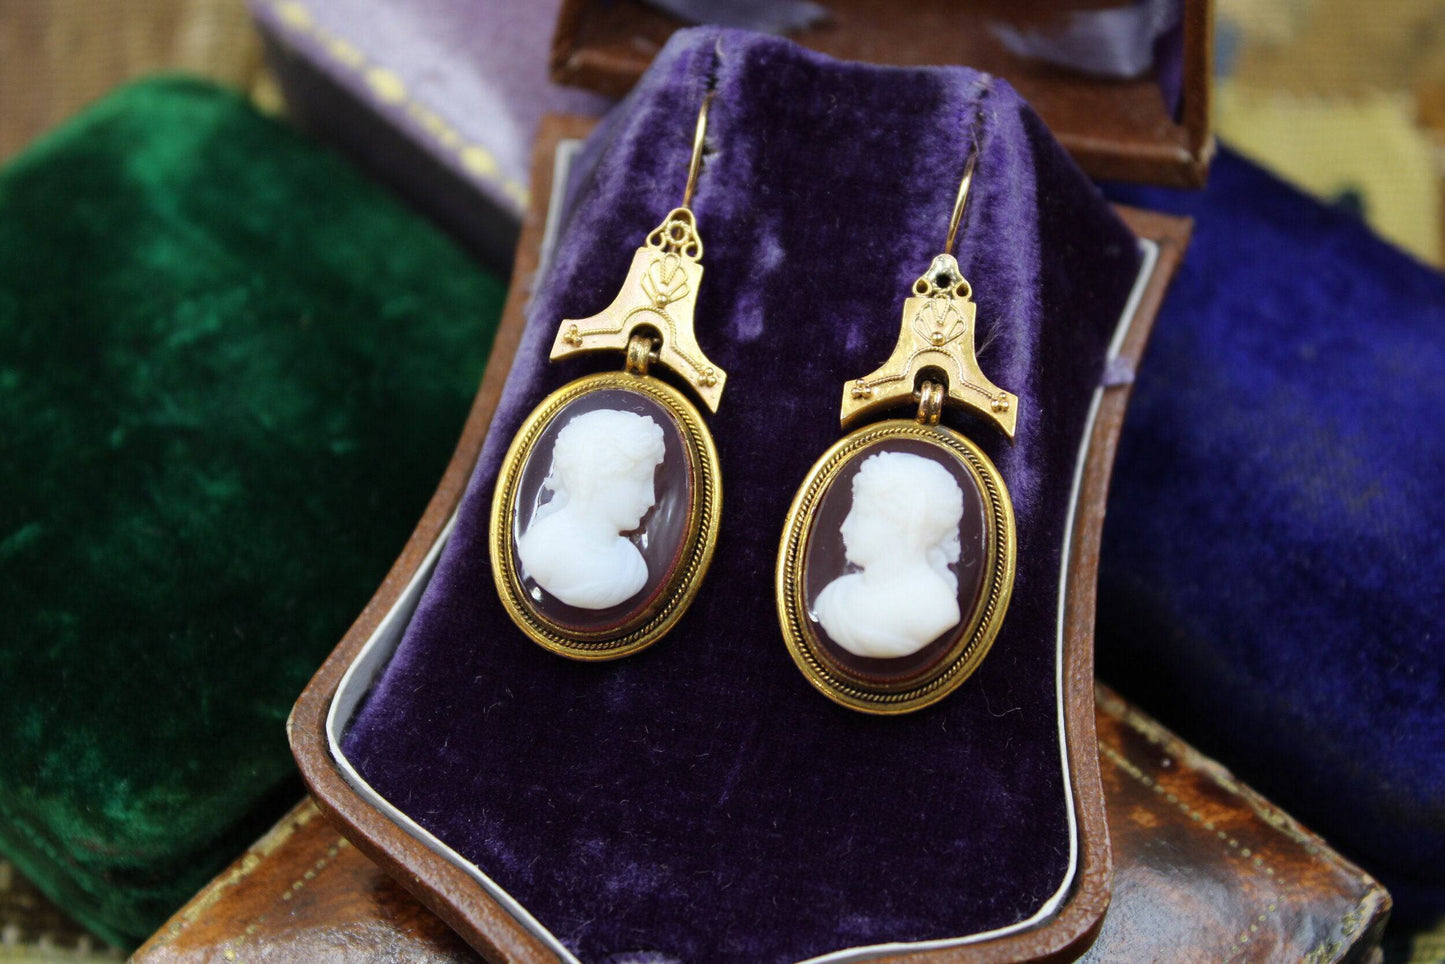 A very fine pair of Hardstone Cameo Drop Earrings mounted in 18ct Yellow Gold, English, Circa 1870 - 80 - Robin Haydock Antiques